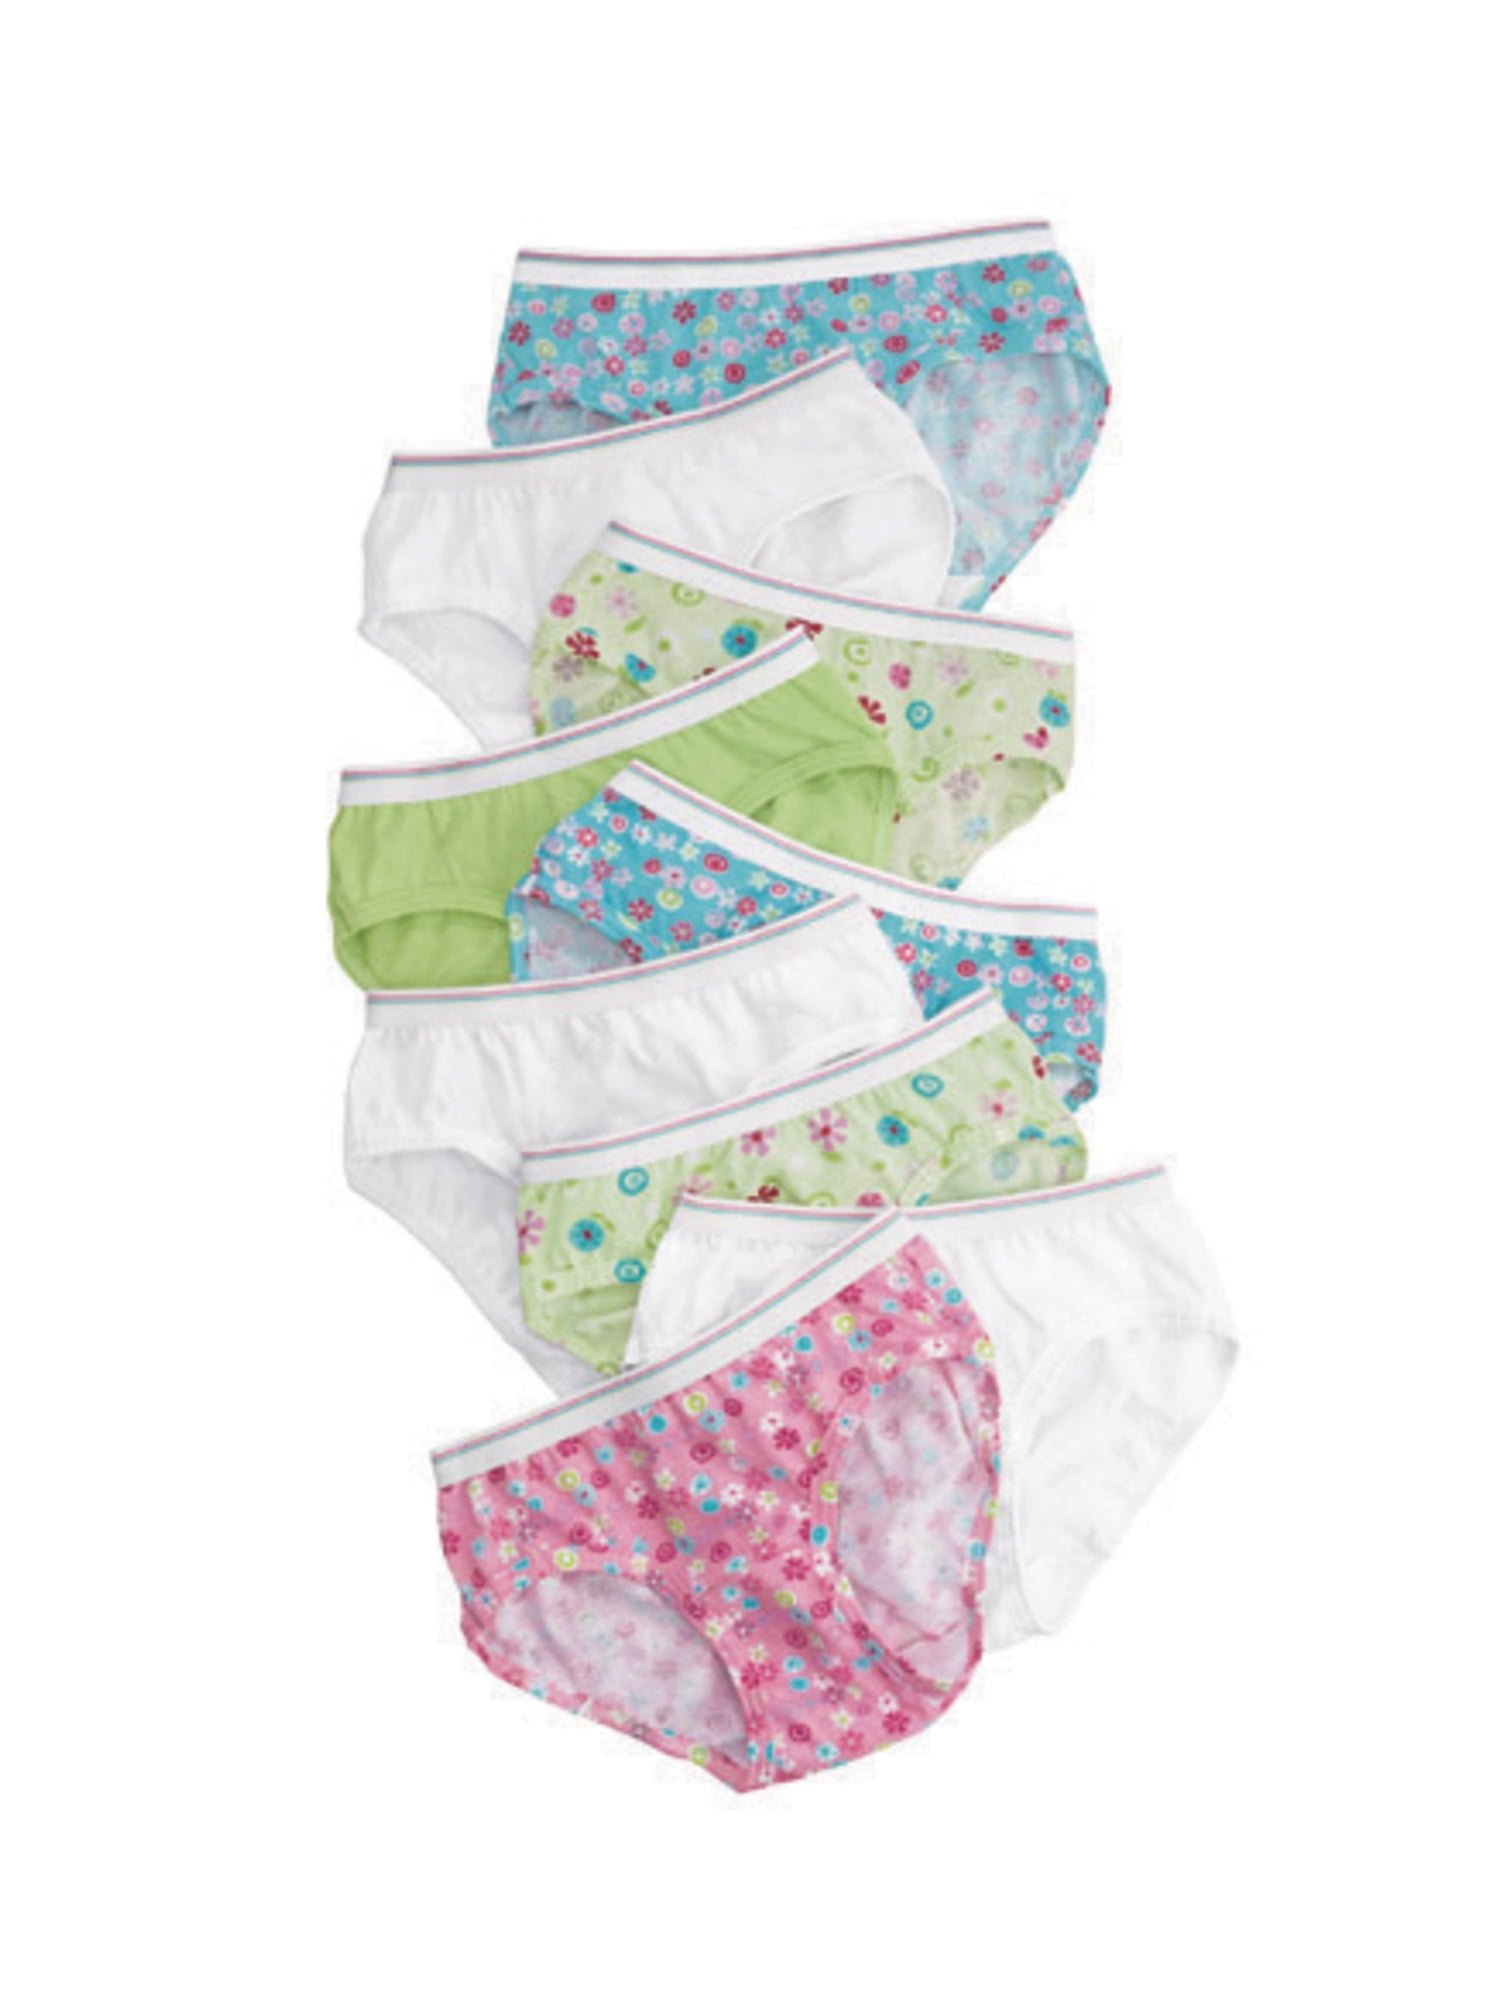 Assorted, Hanes Ultimate Girls 4-Pack Cotton Stretch Hipster Panties